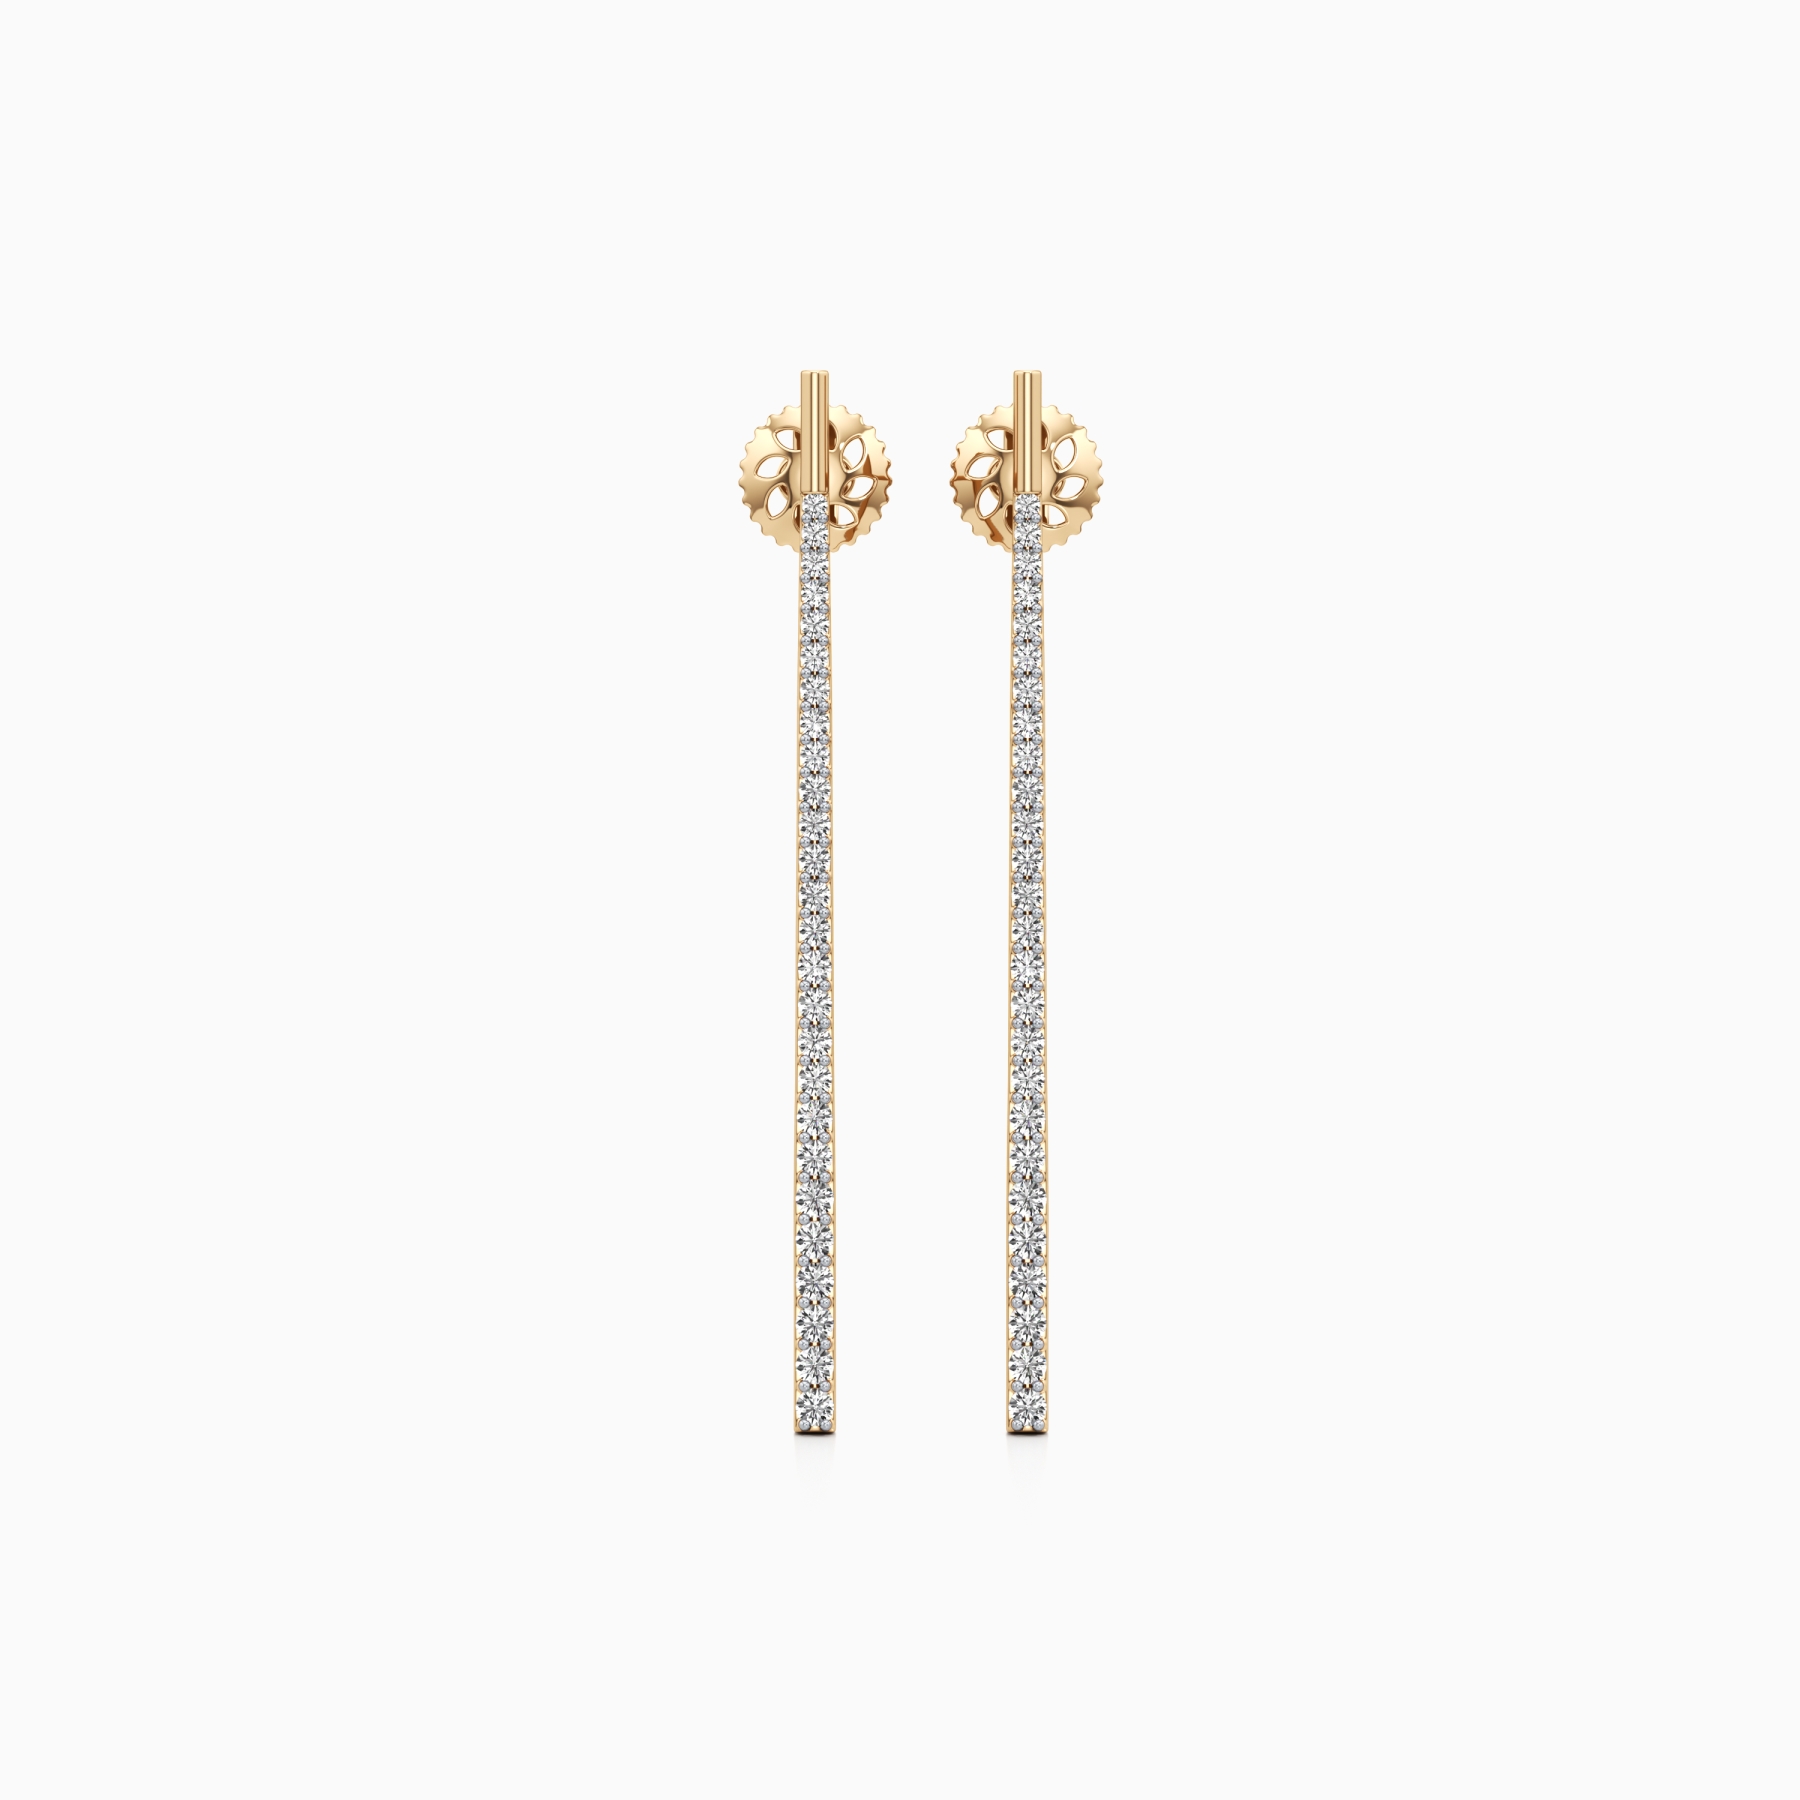 Sparkling Tower Earrings in Yellow 14K Gold